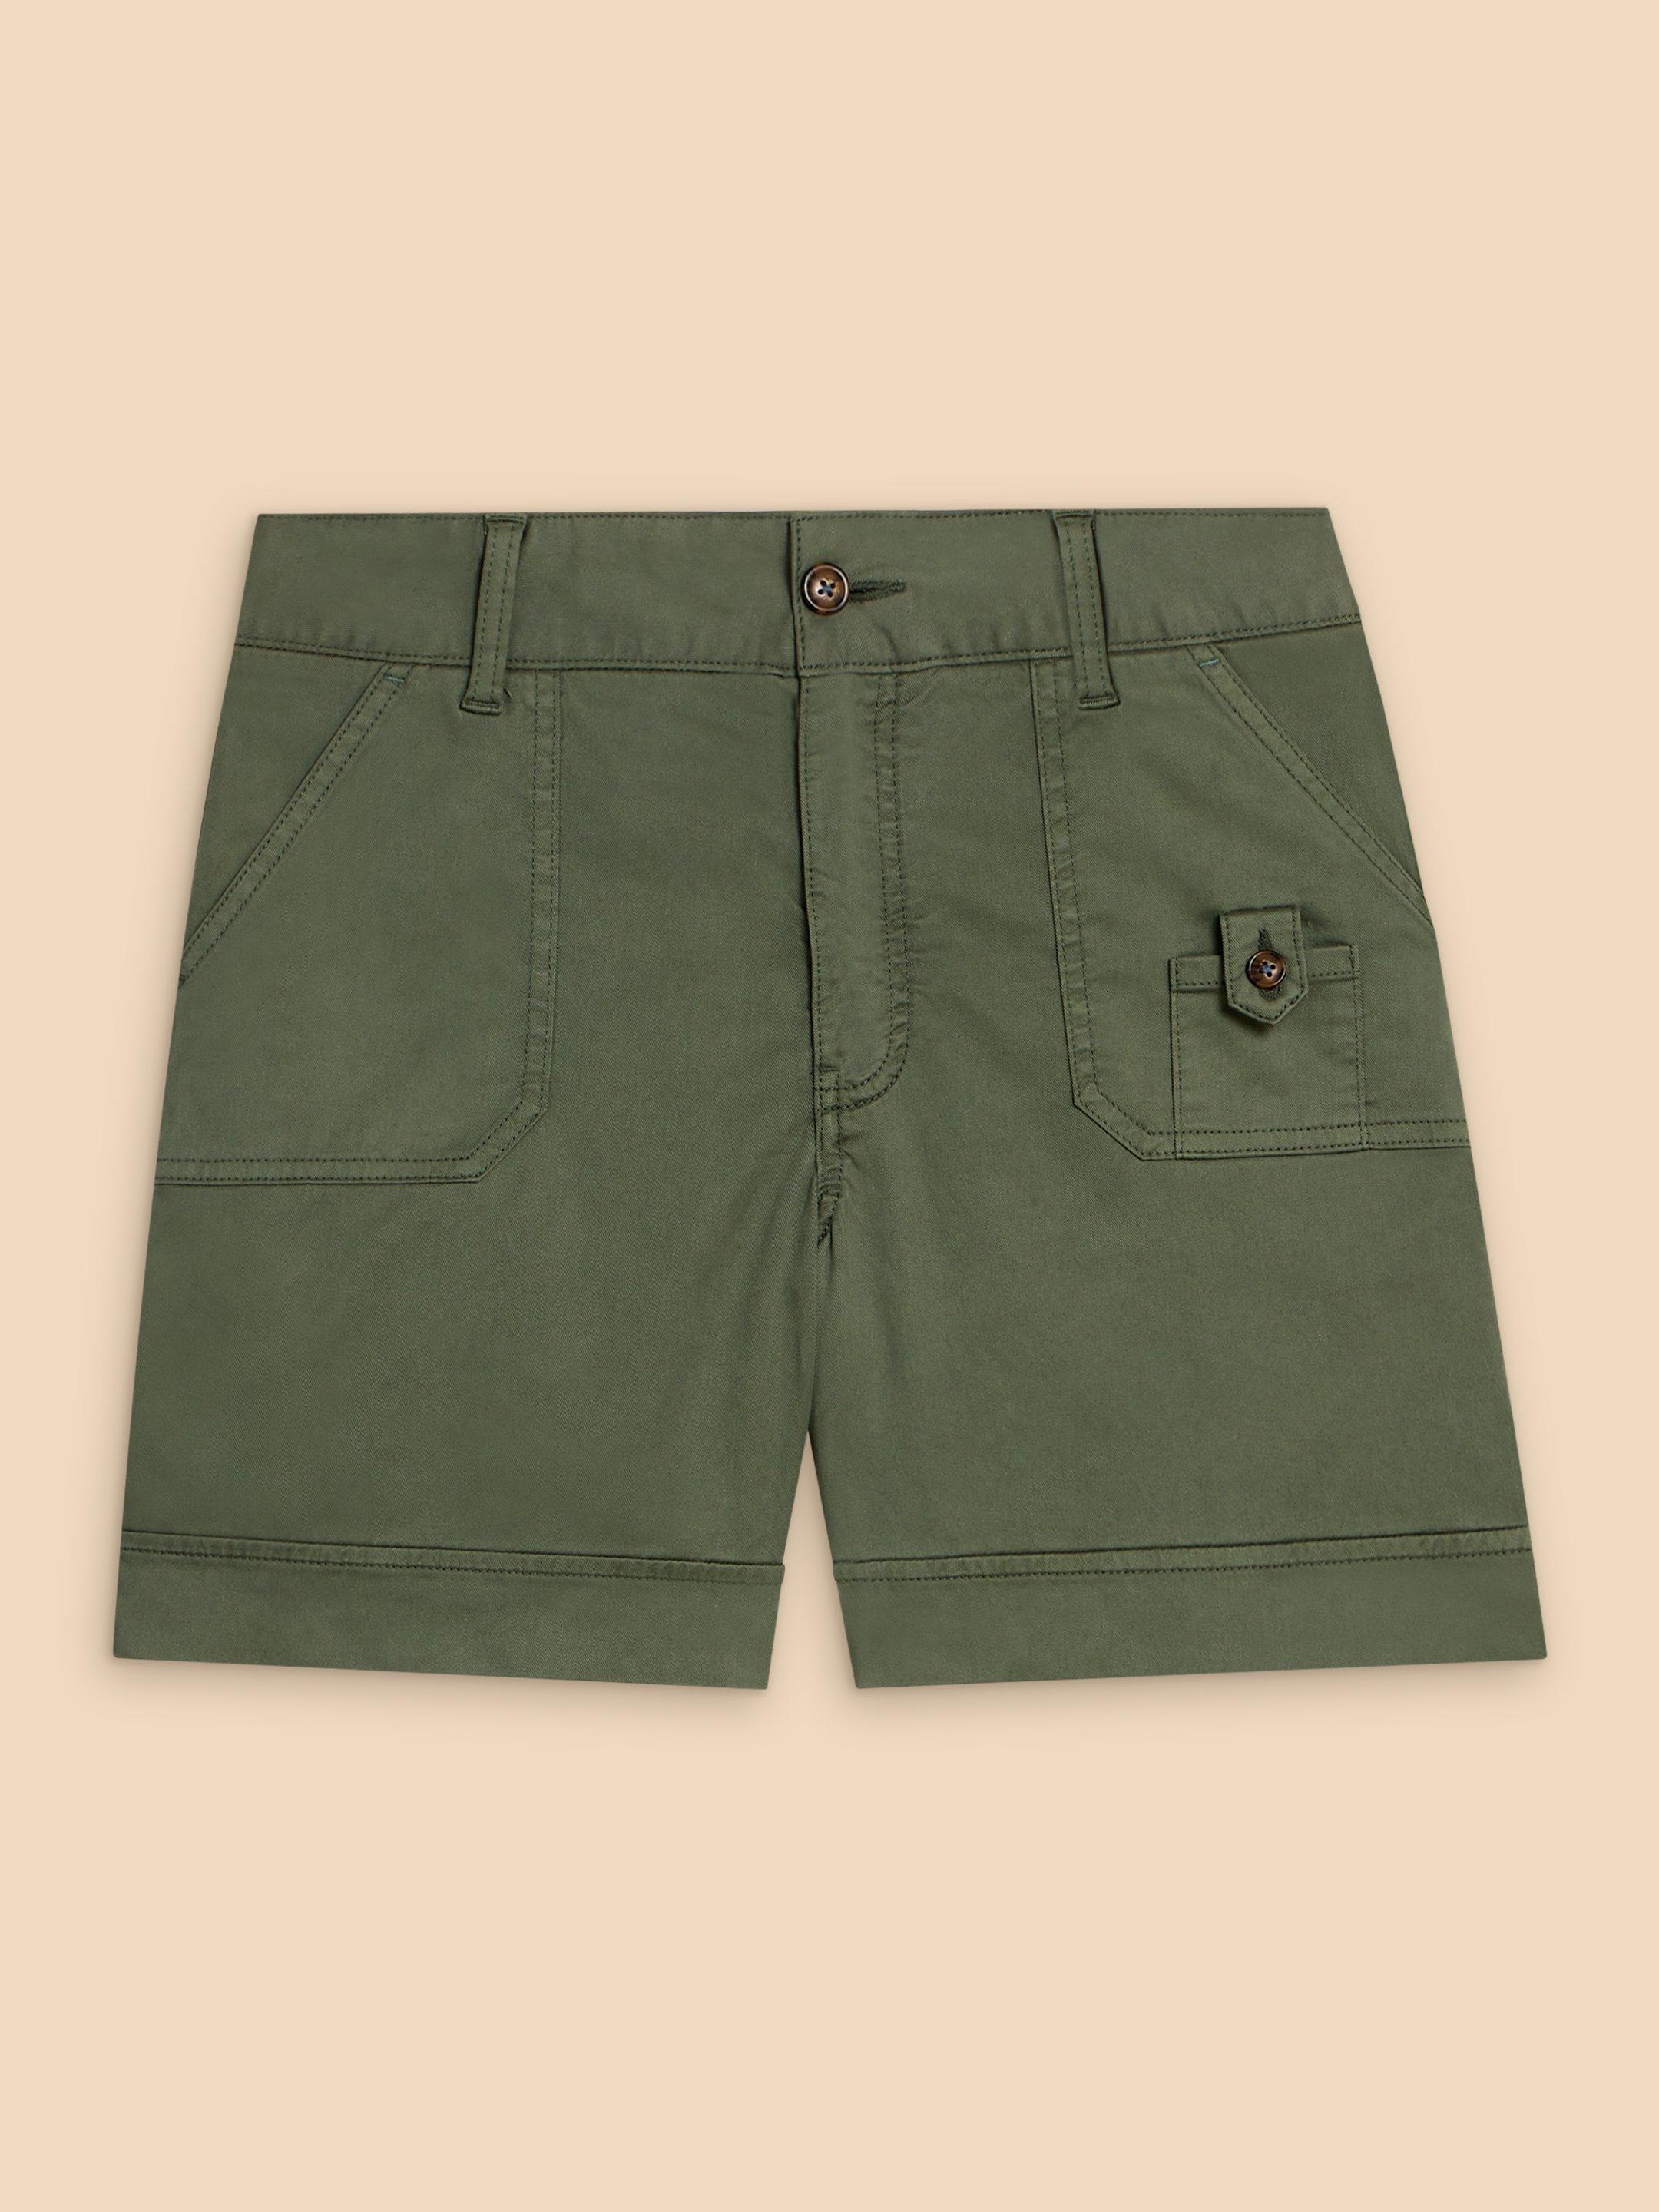 Mollie Woven Combat Shorts in MID GREEN - FLAT FRONT